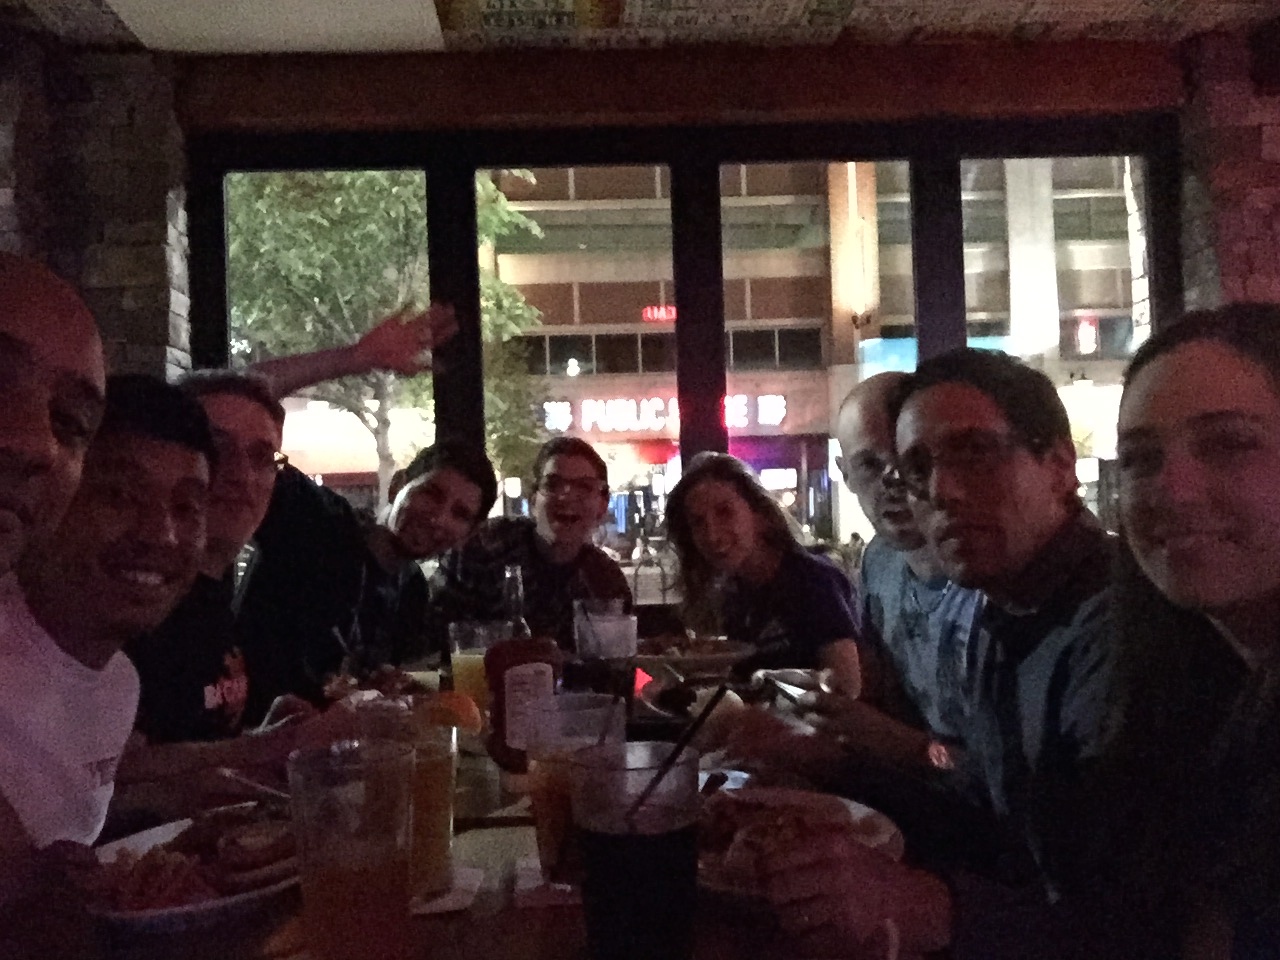 2015-10-07-review-of-agile-2015-at-washington-dc-2